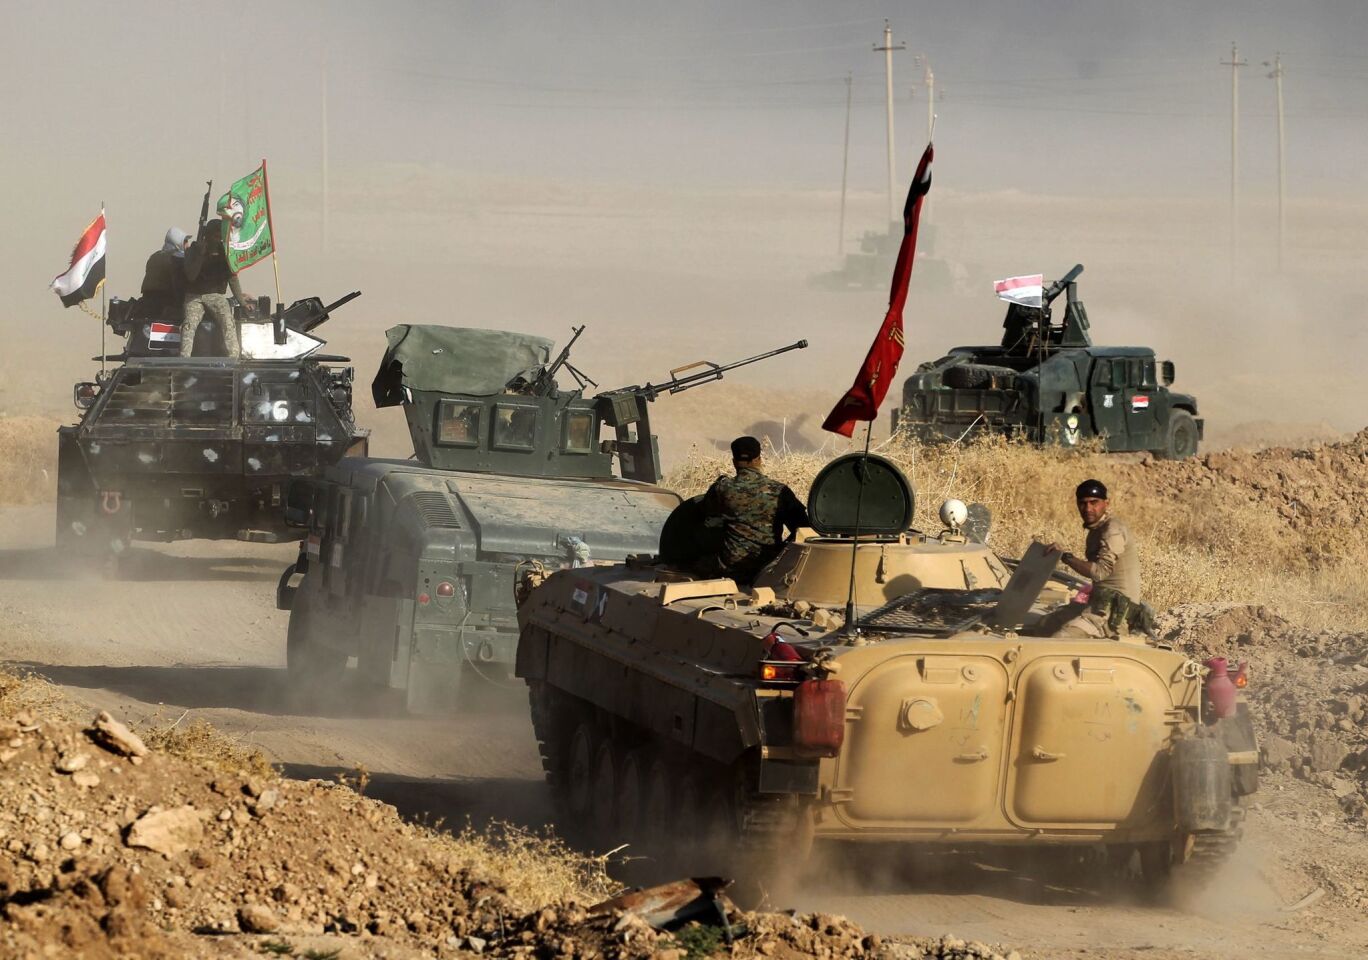 Iraqi forces head north toward Mosul on Monday, part of the operation to retake the city from Islamic State.